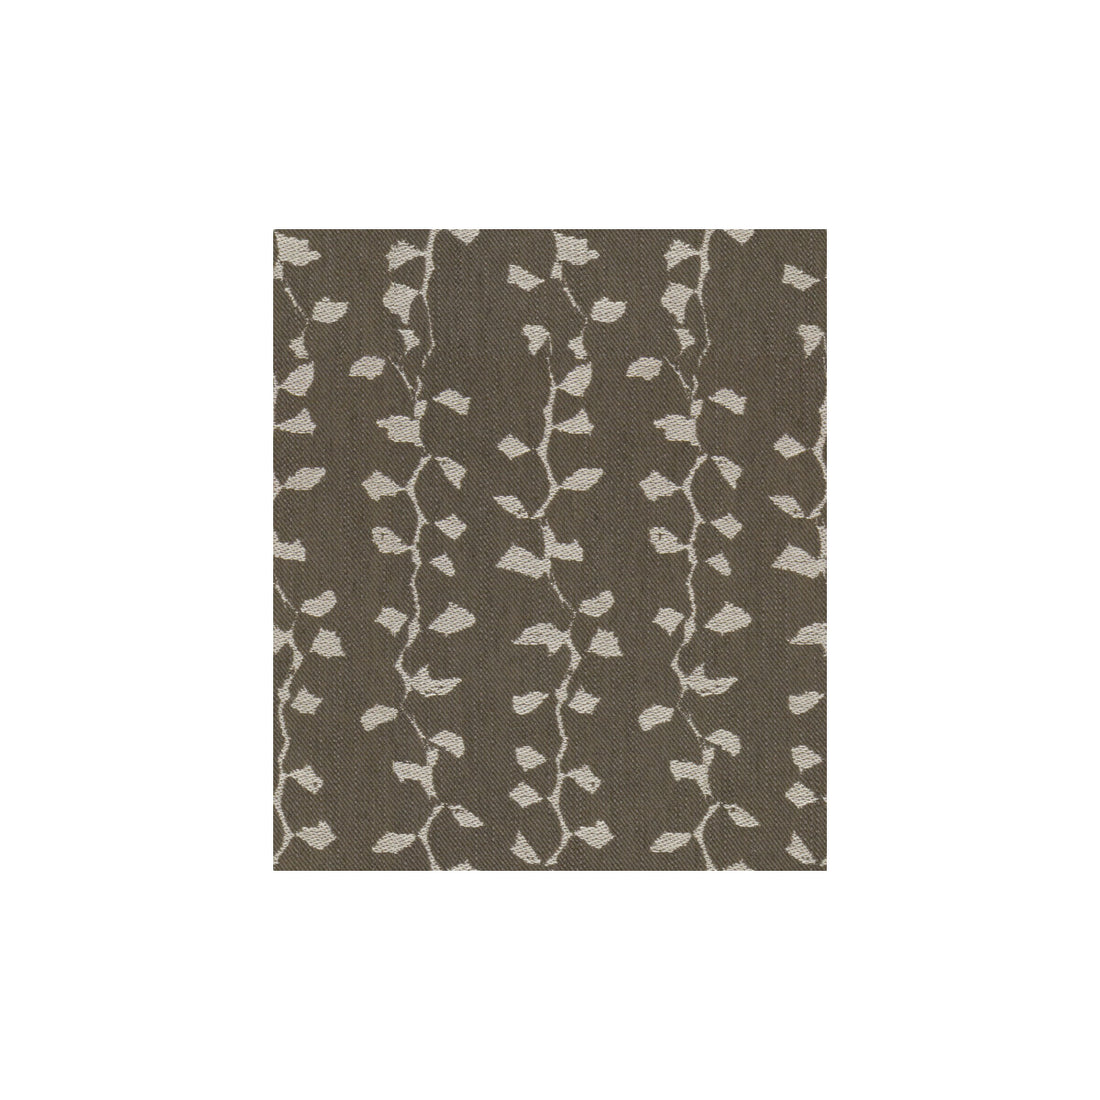 Jungle fabric in taupe color - pattern GWF-3203.611.0 - by Lee Jofa Modern in the Allegra Hicks Islands collection